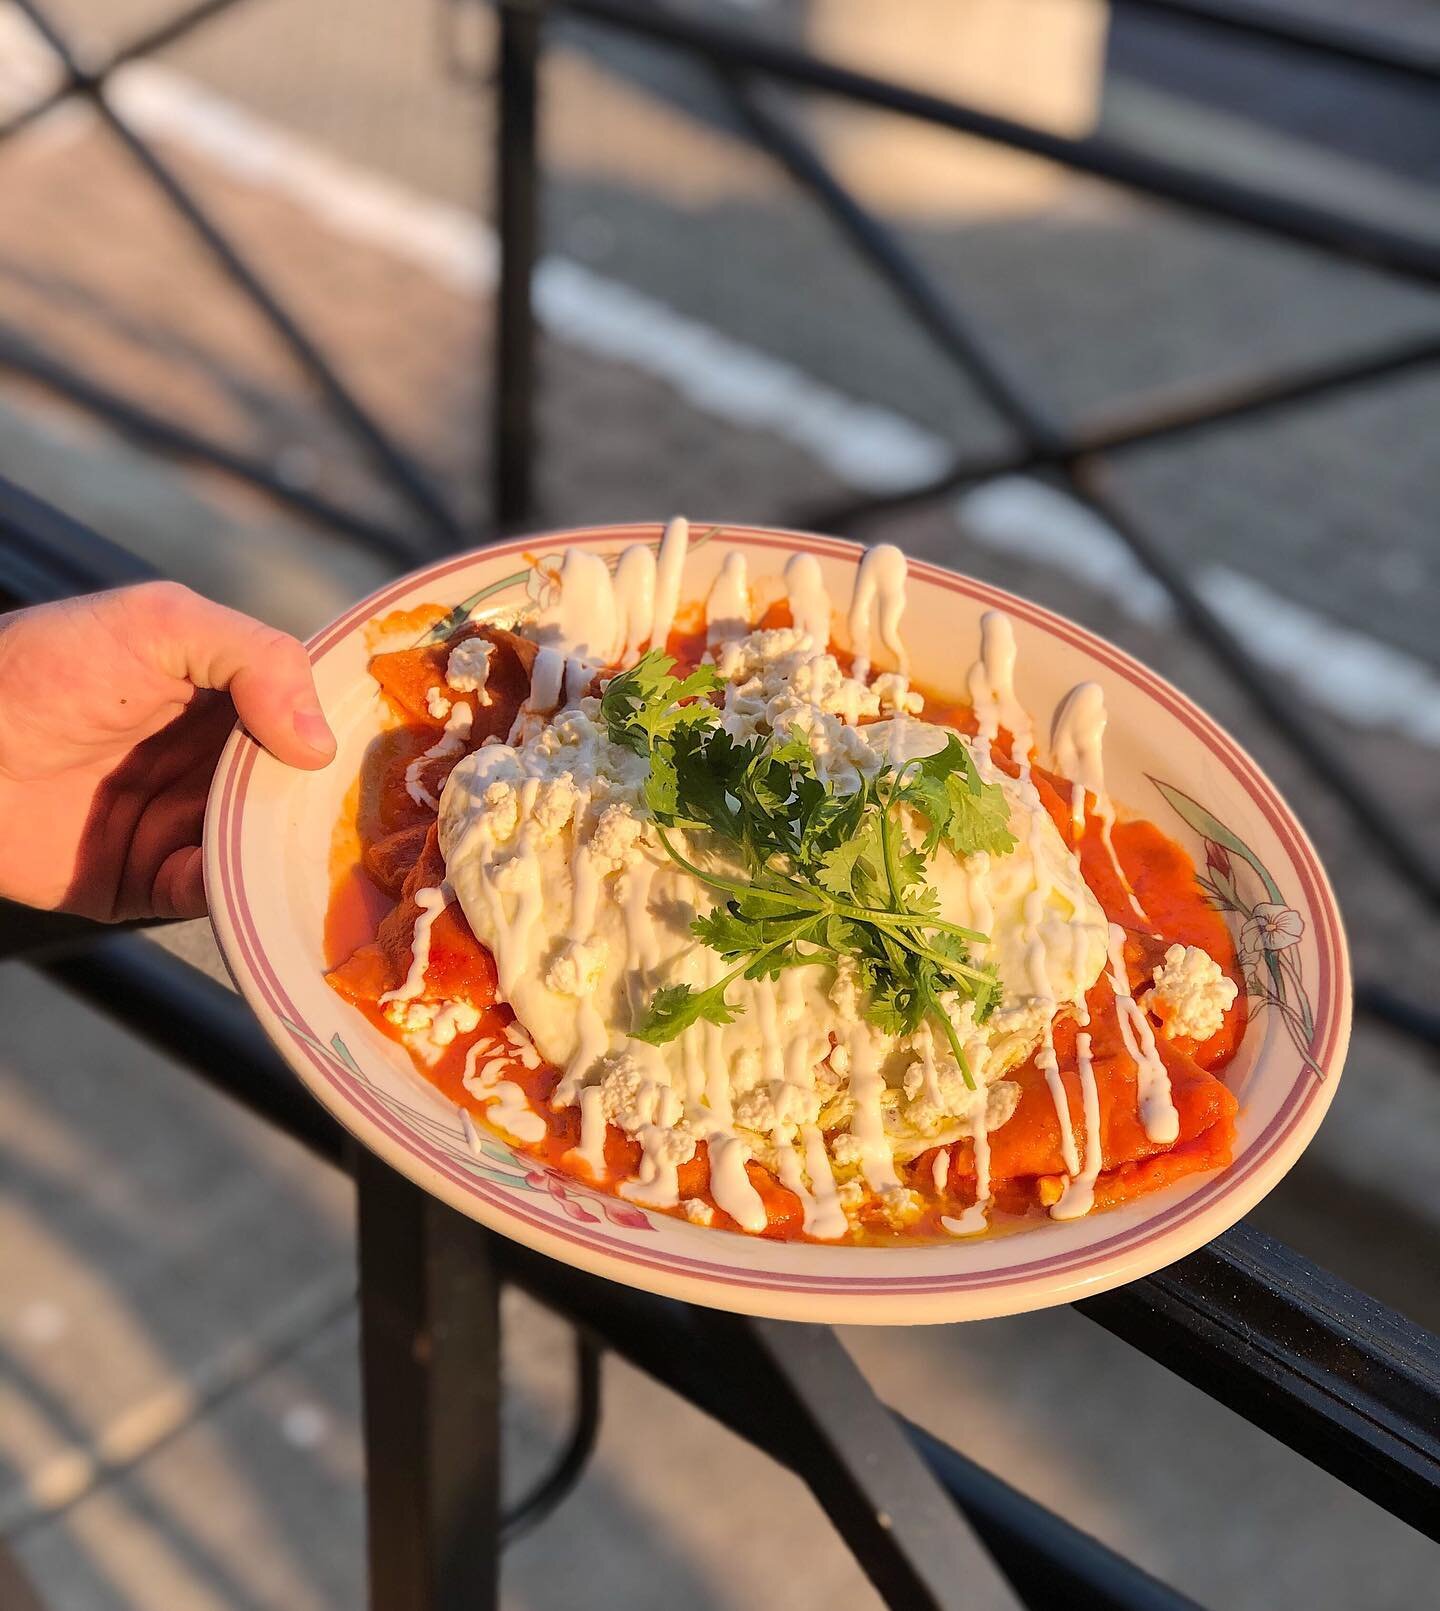 Guess whos back!!! Chilaquiles now served till 2pm 🤠
&bull;
&bull;
&bull;
#restaurant #food #foodie #instafood #dinner #bar #delicious #yummy #foodphotography #foodlover #cafe #lunch #foodstagram #instagood #hotel #love #foodblogger #pizza #tasty #w